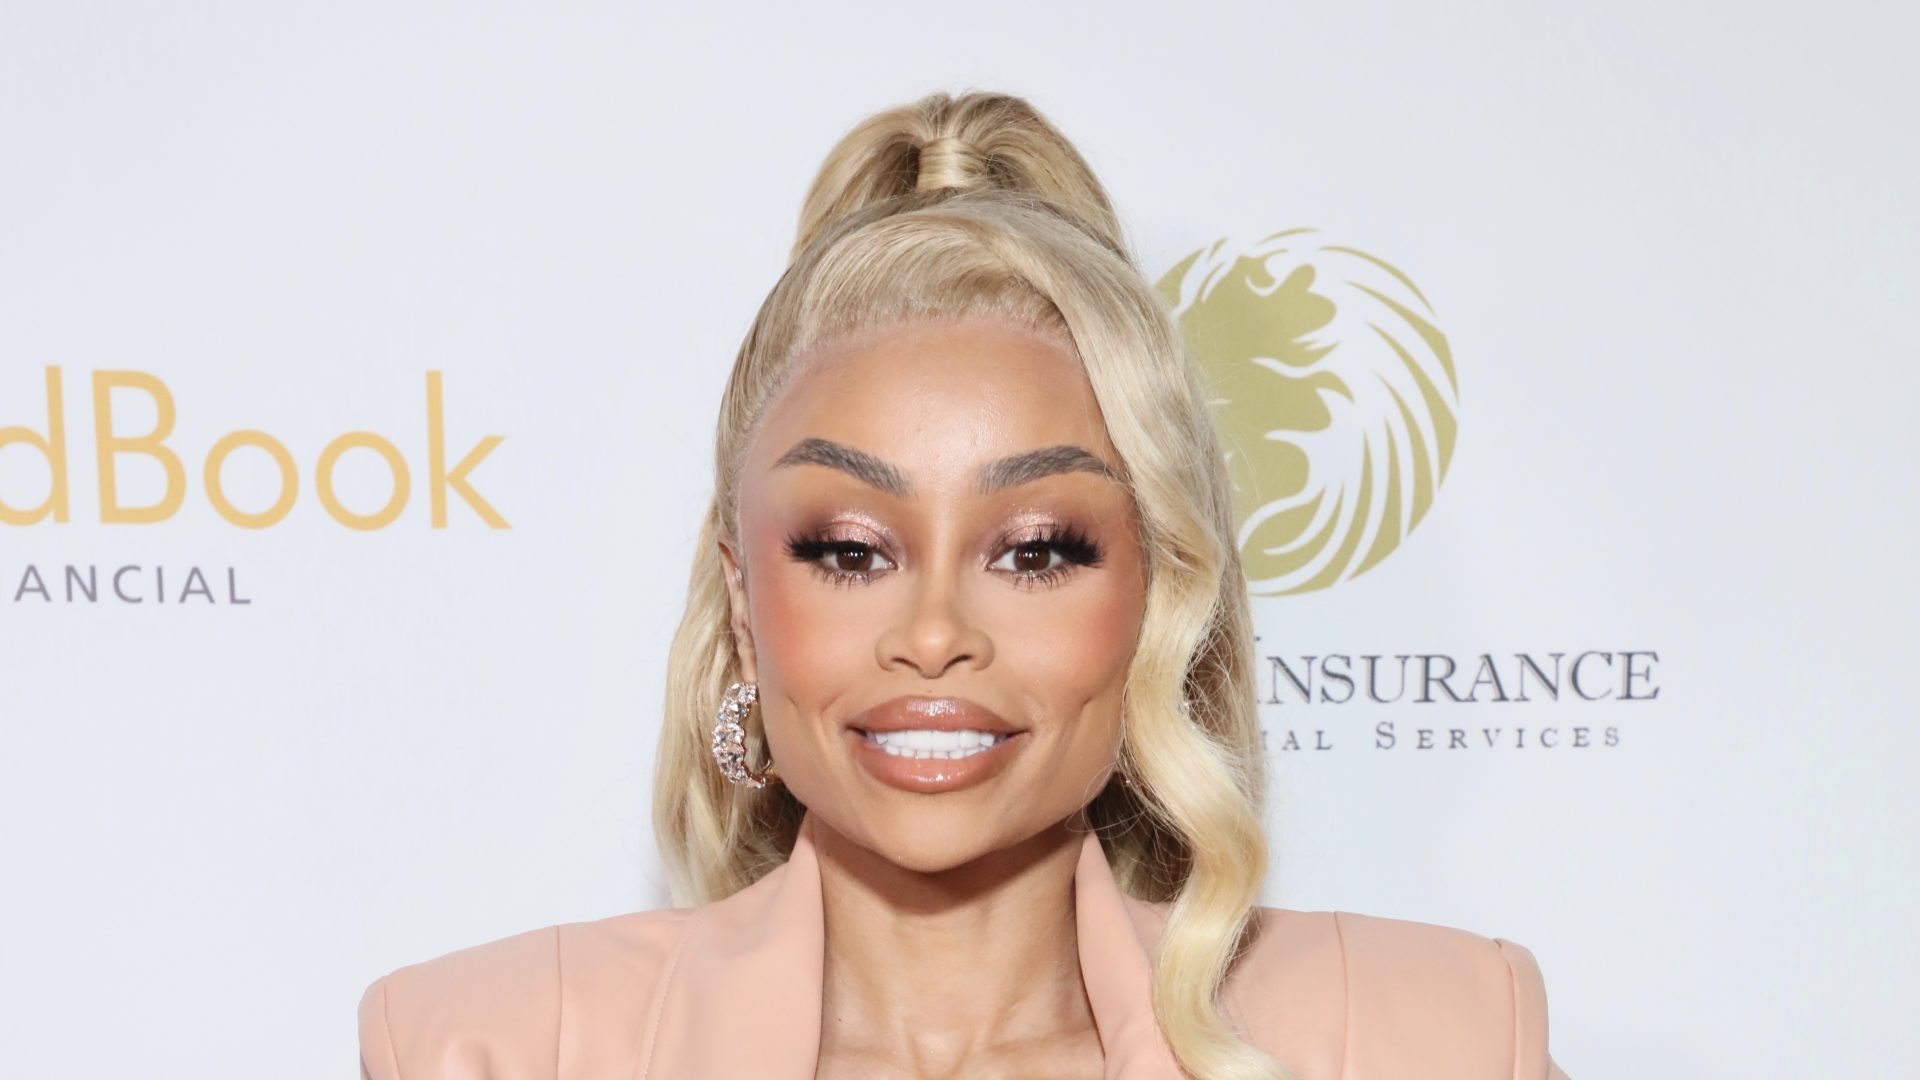 Blac Chyna Opens Up About "Painful" Complications From Breast Reduction Surgery (Video)